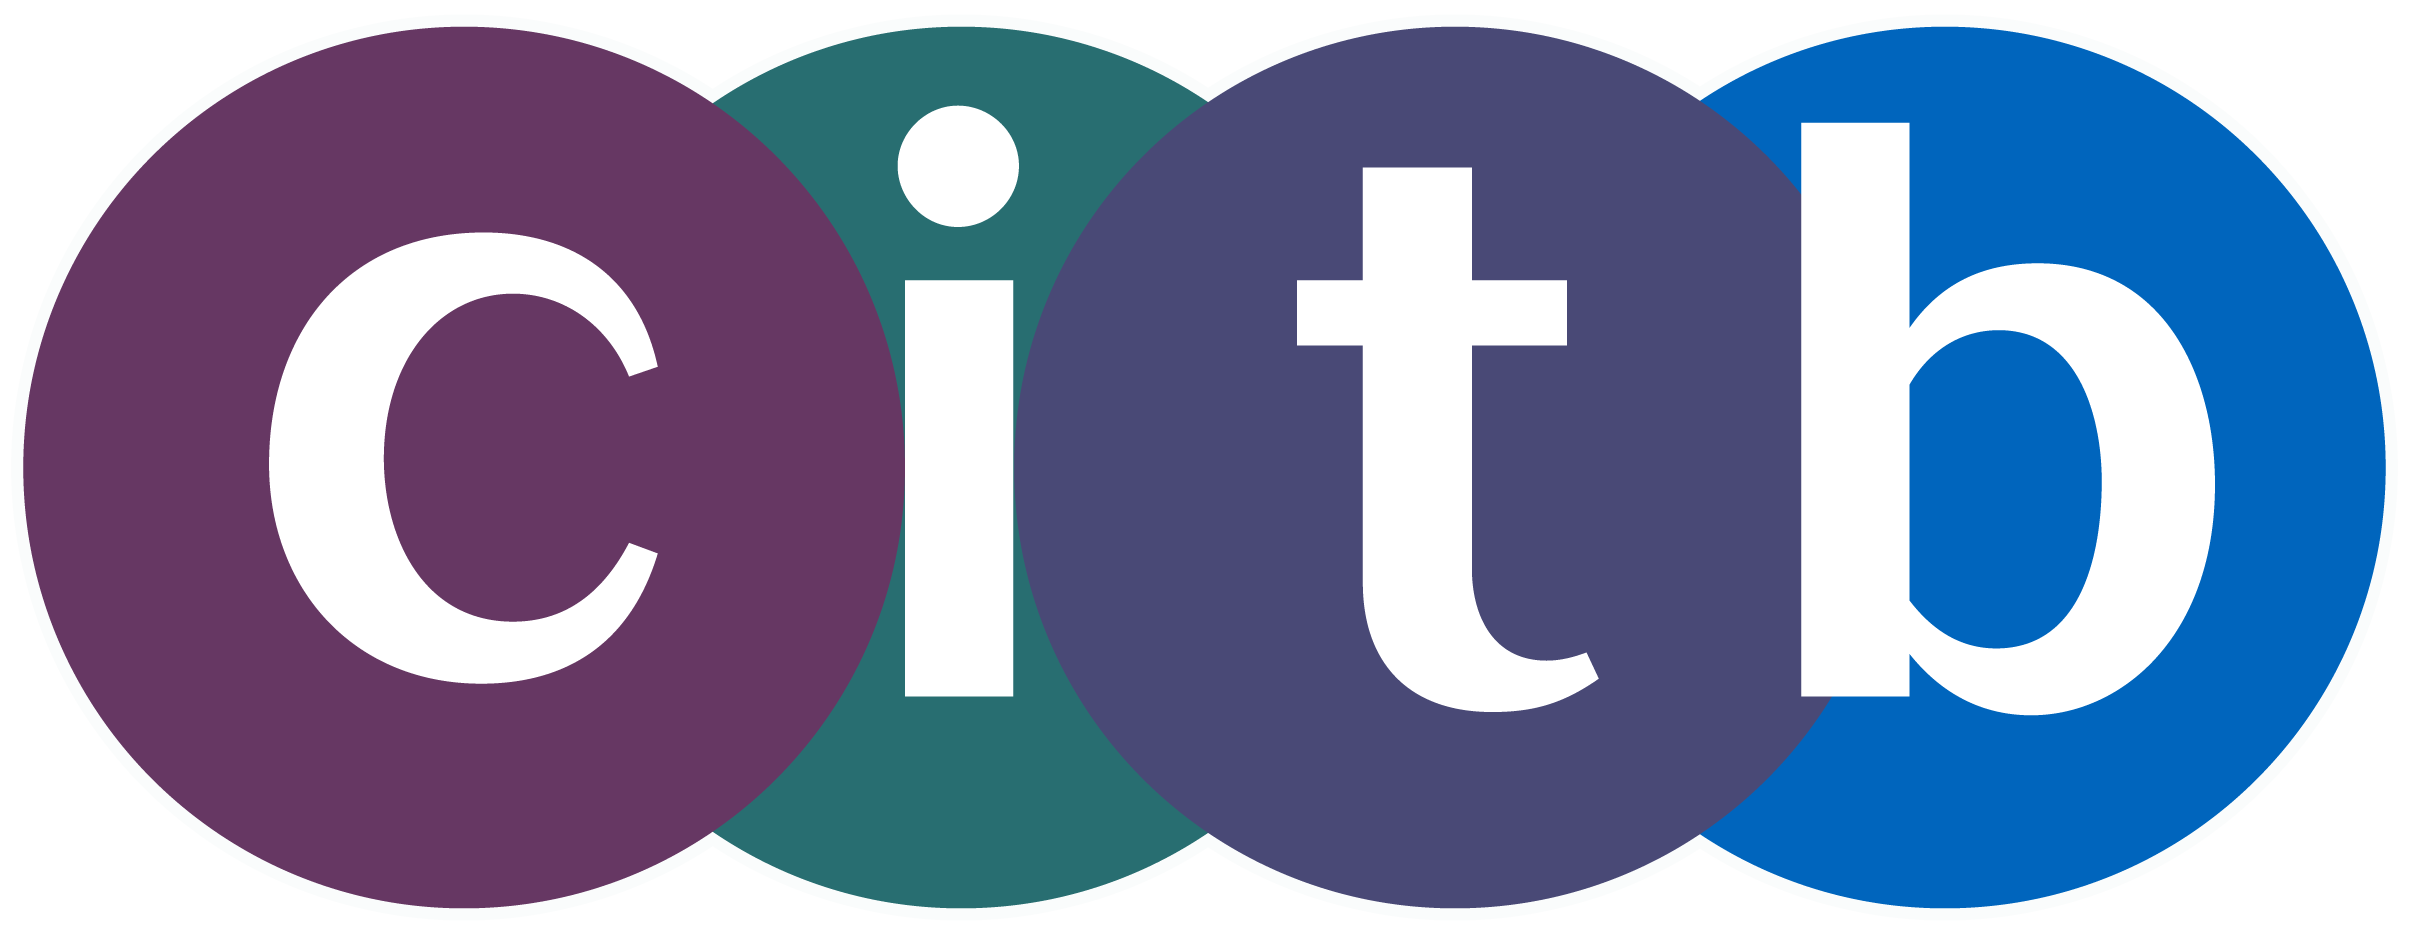 CITB logo 2 with white outline